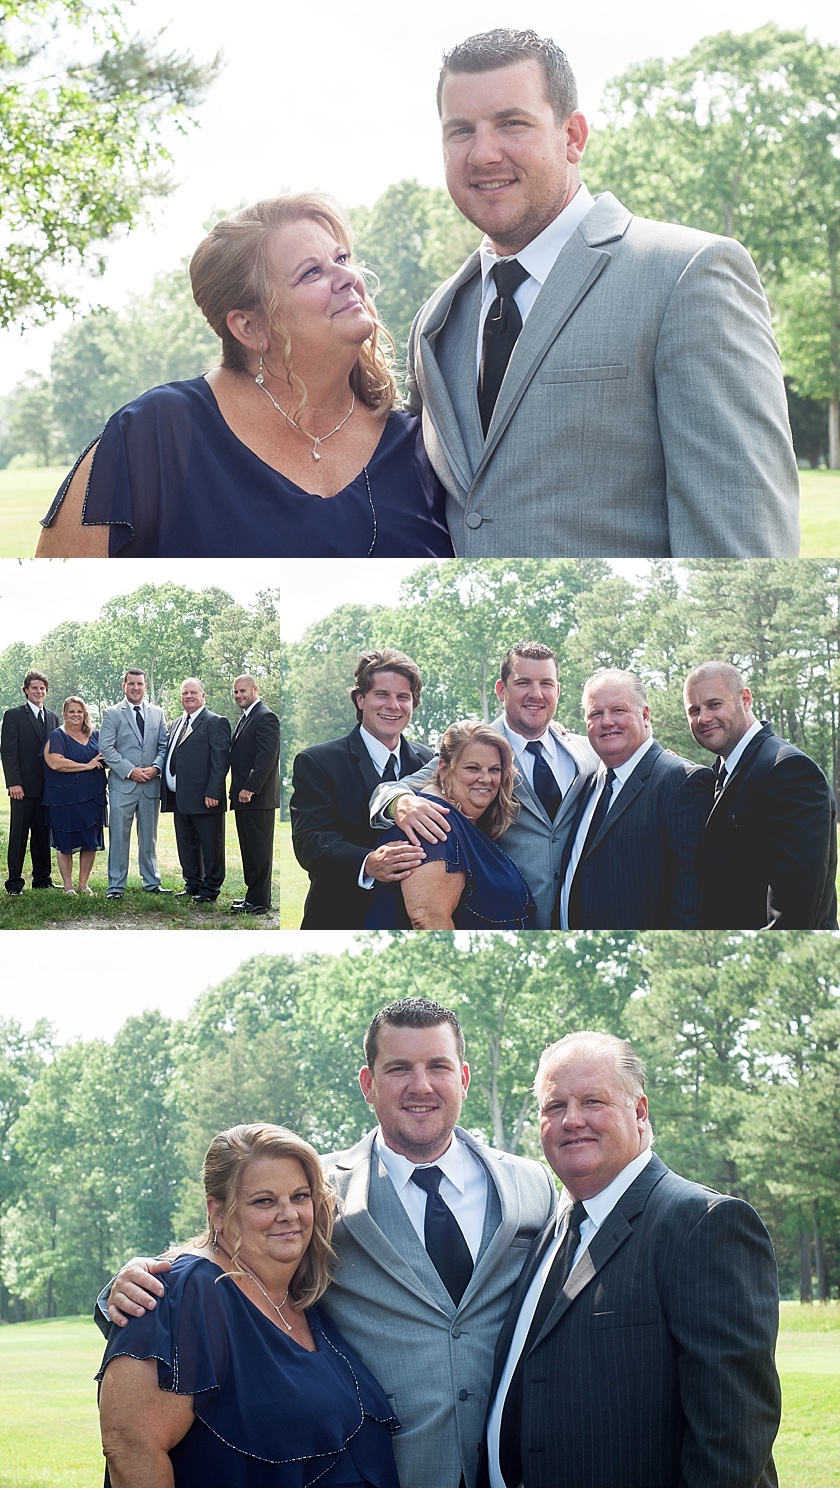 family portraits south jersey wedding